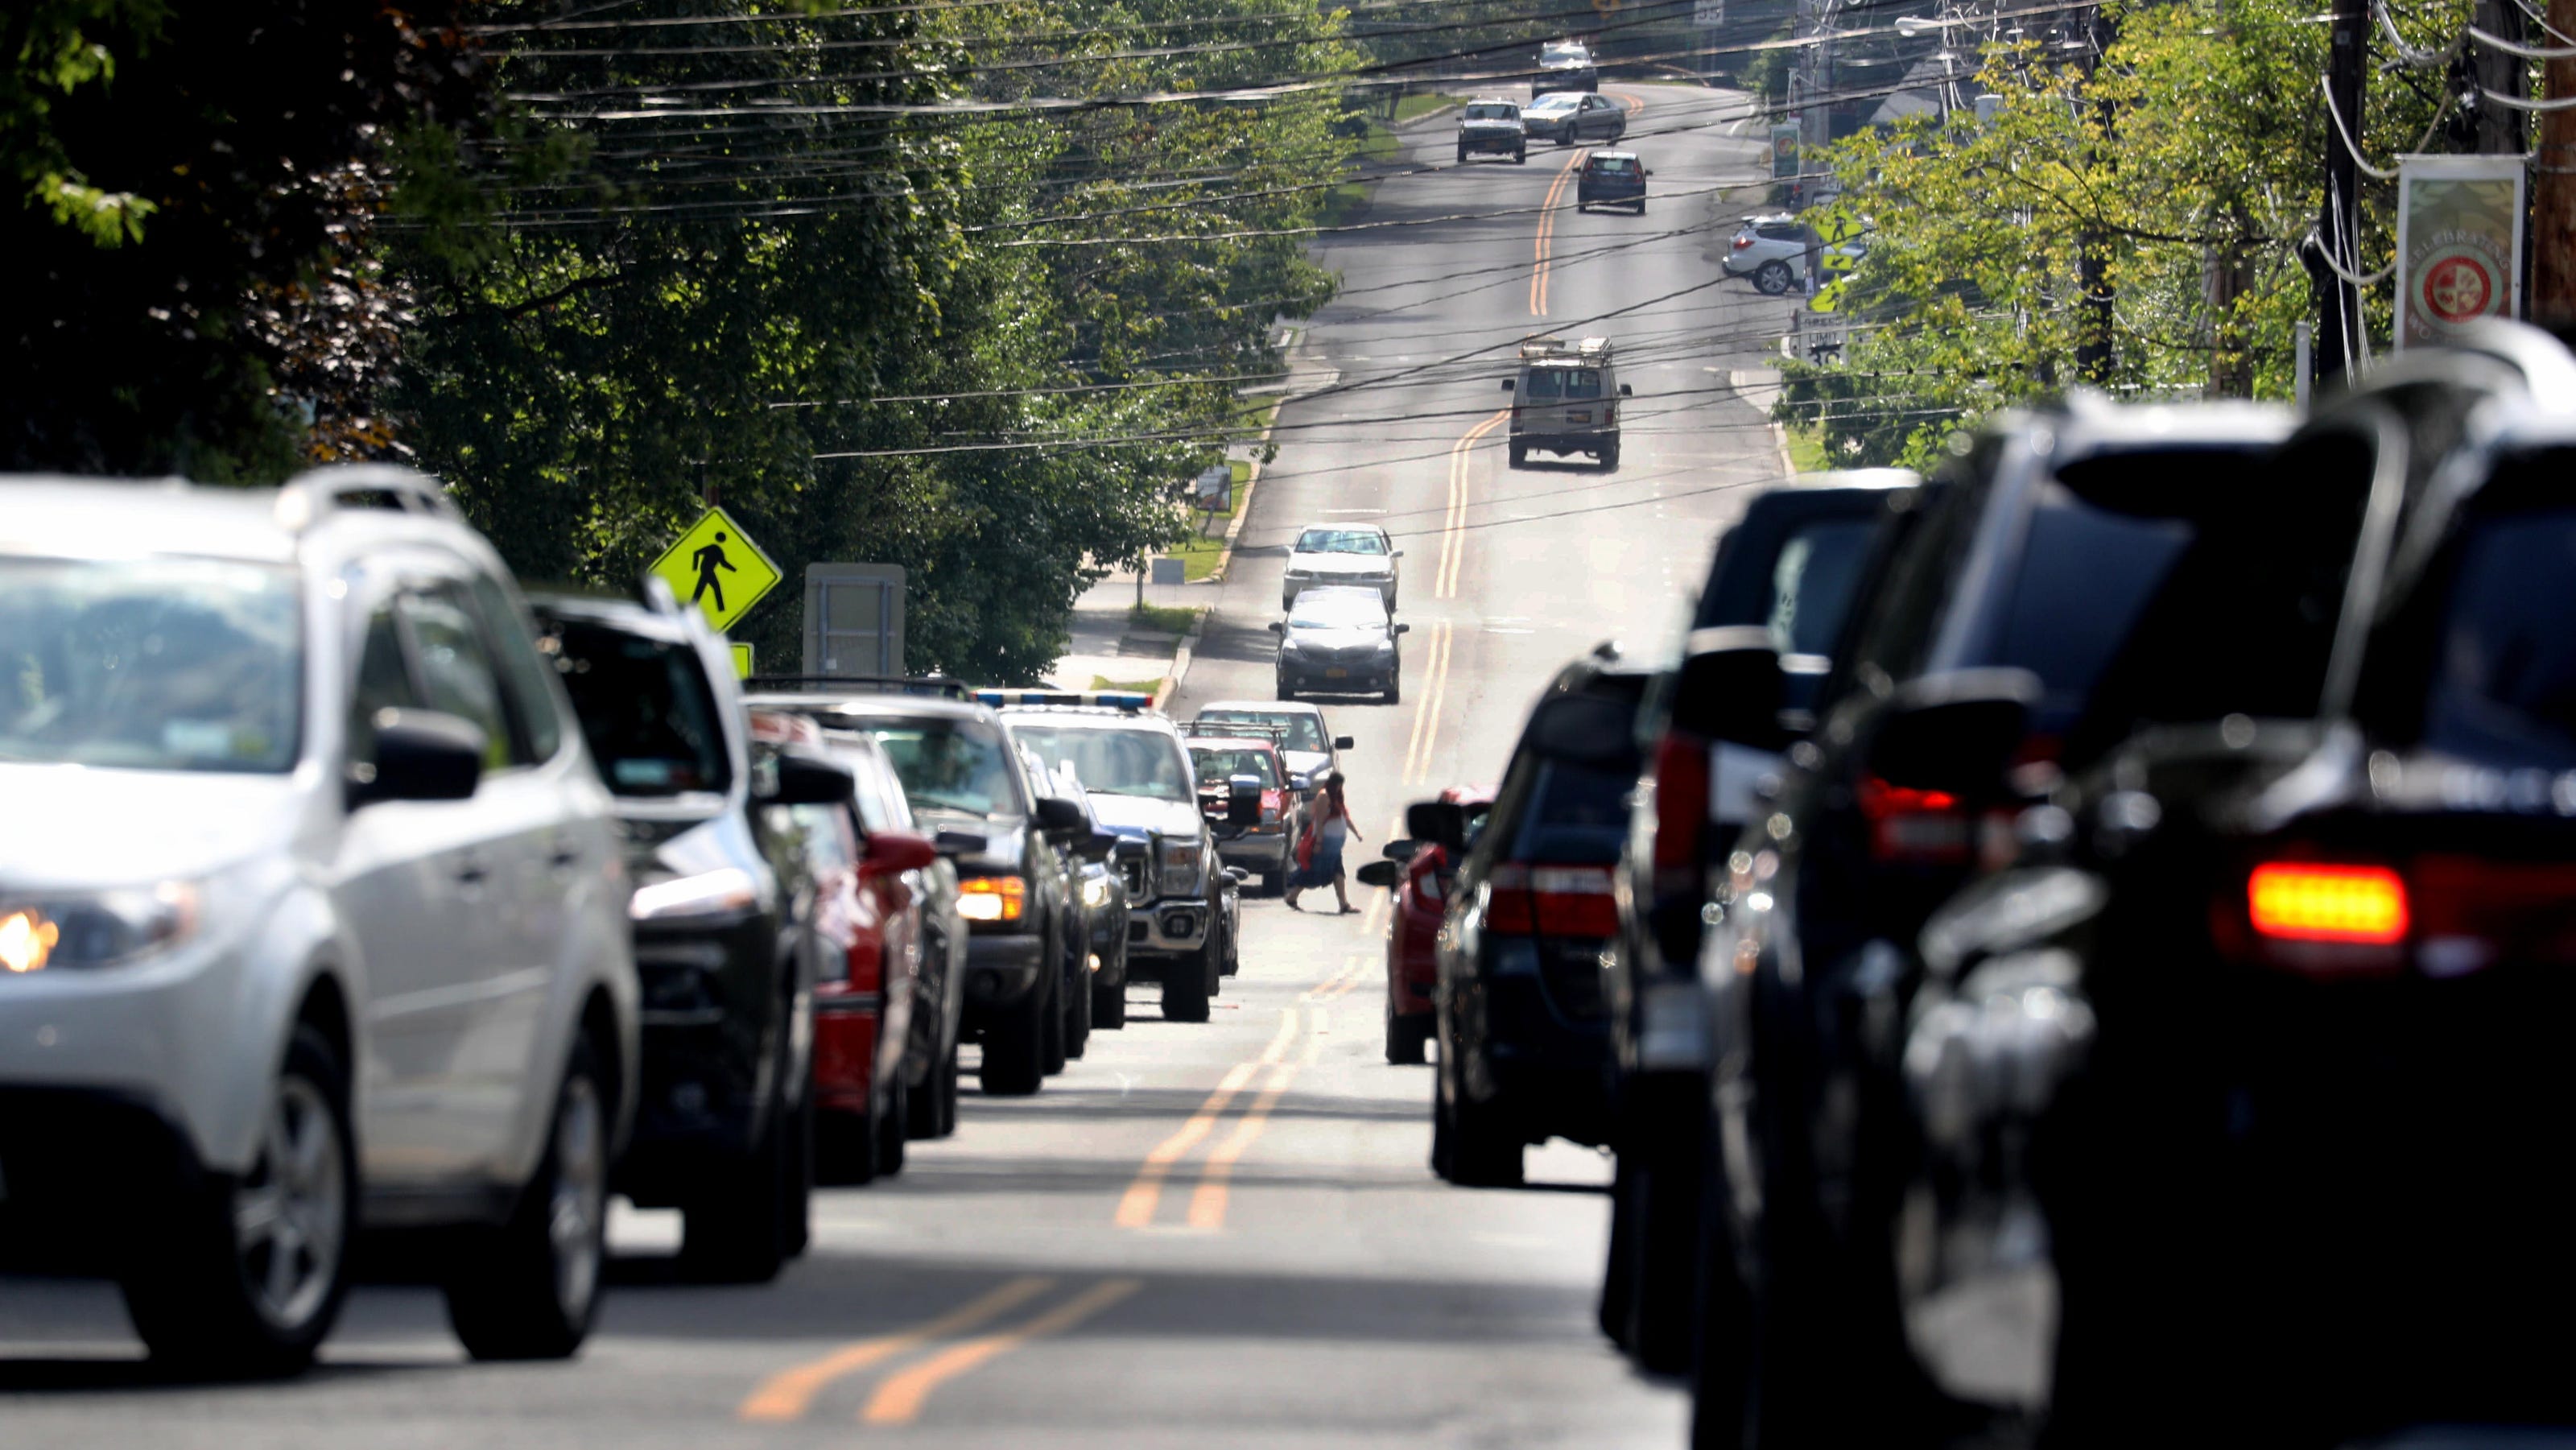 Labor Day traffic When NOT to leave and what to expect at the airport